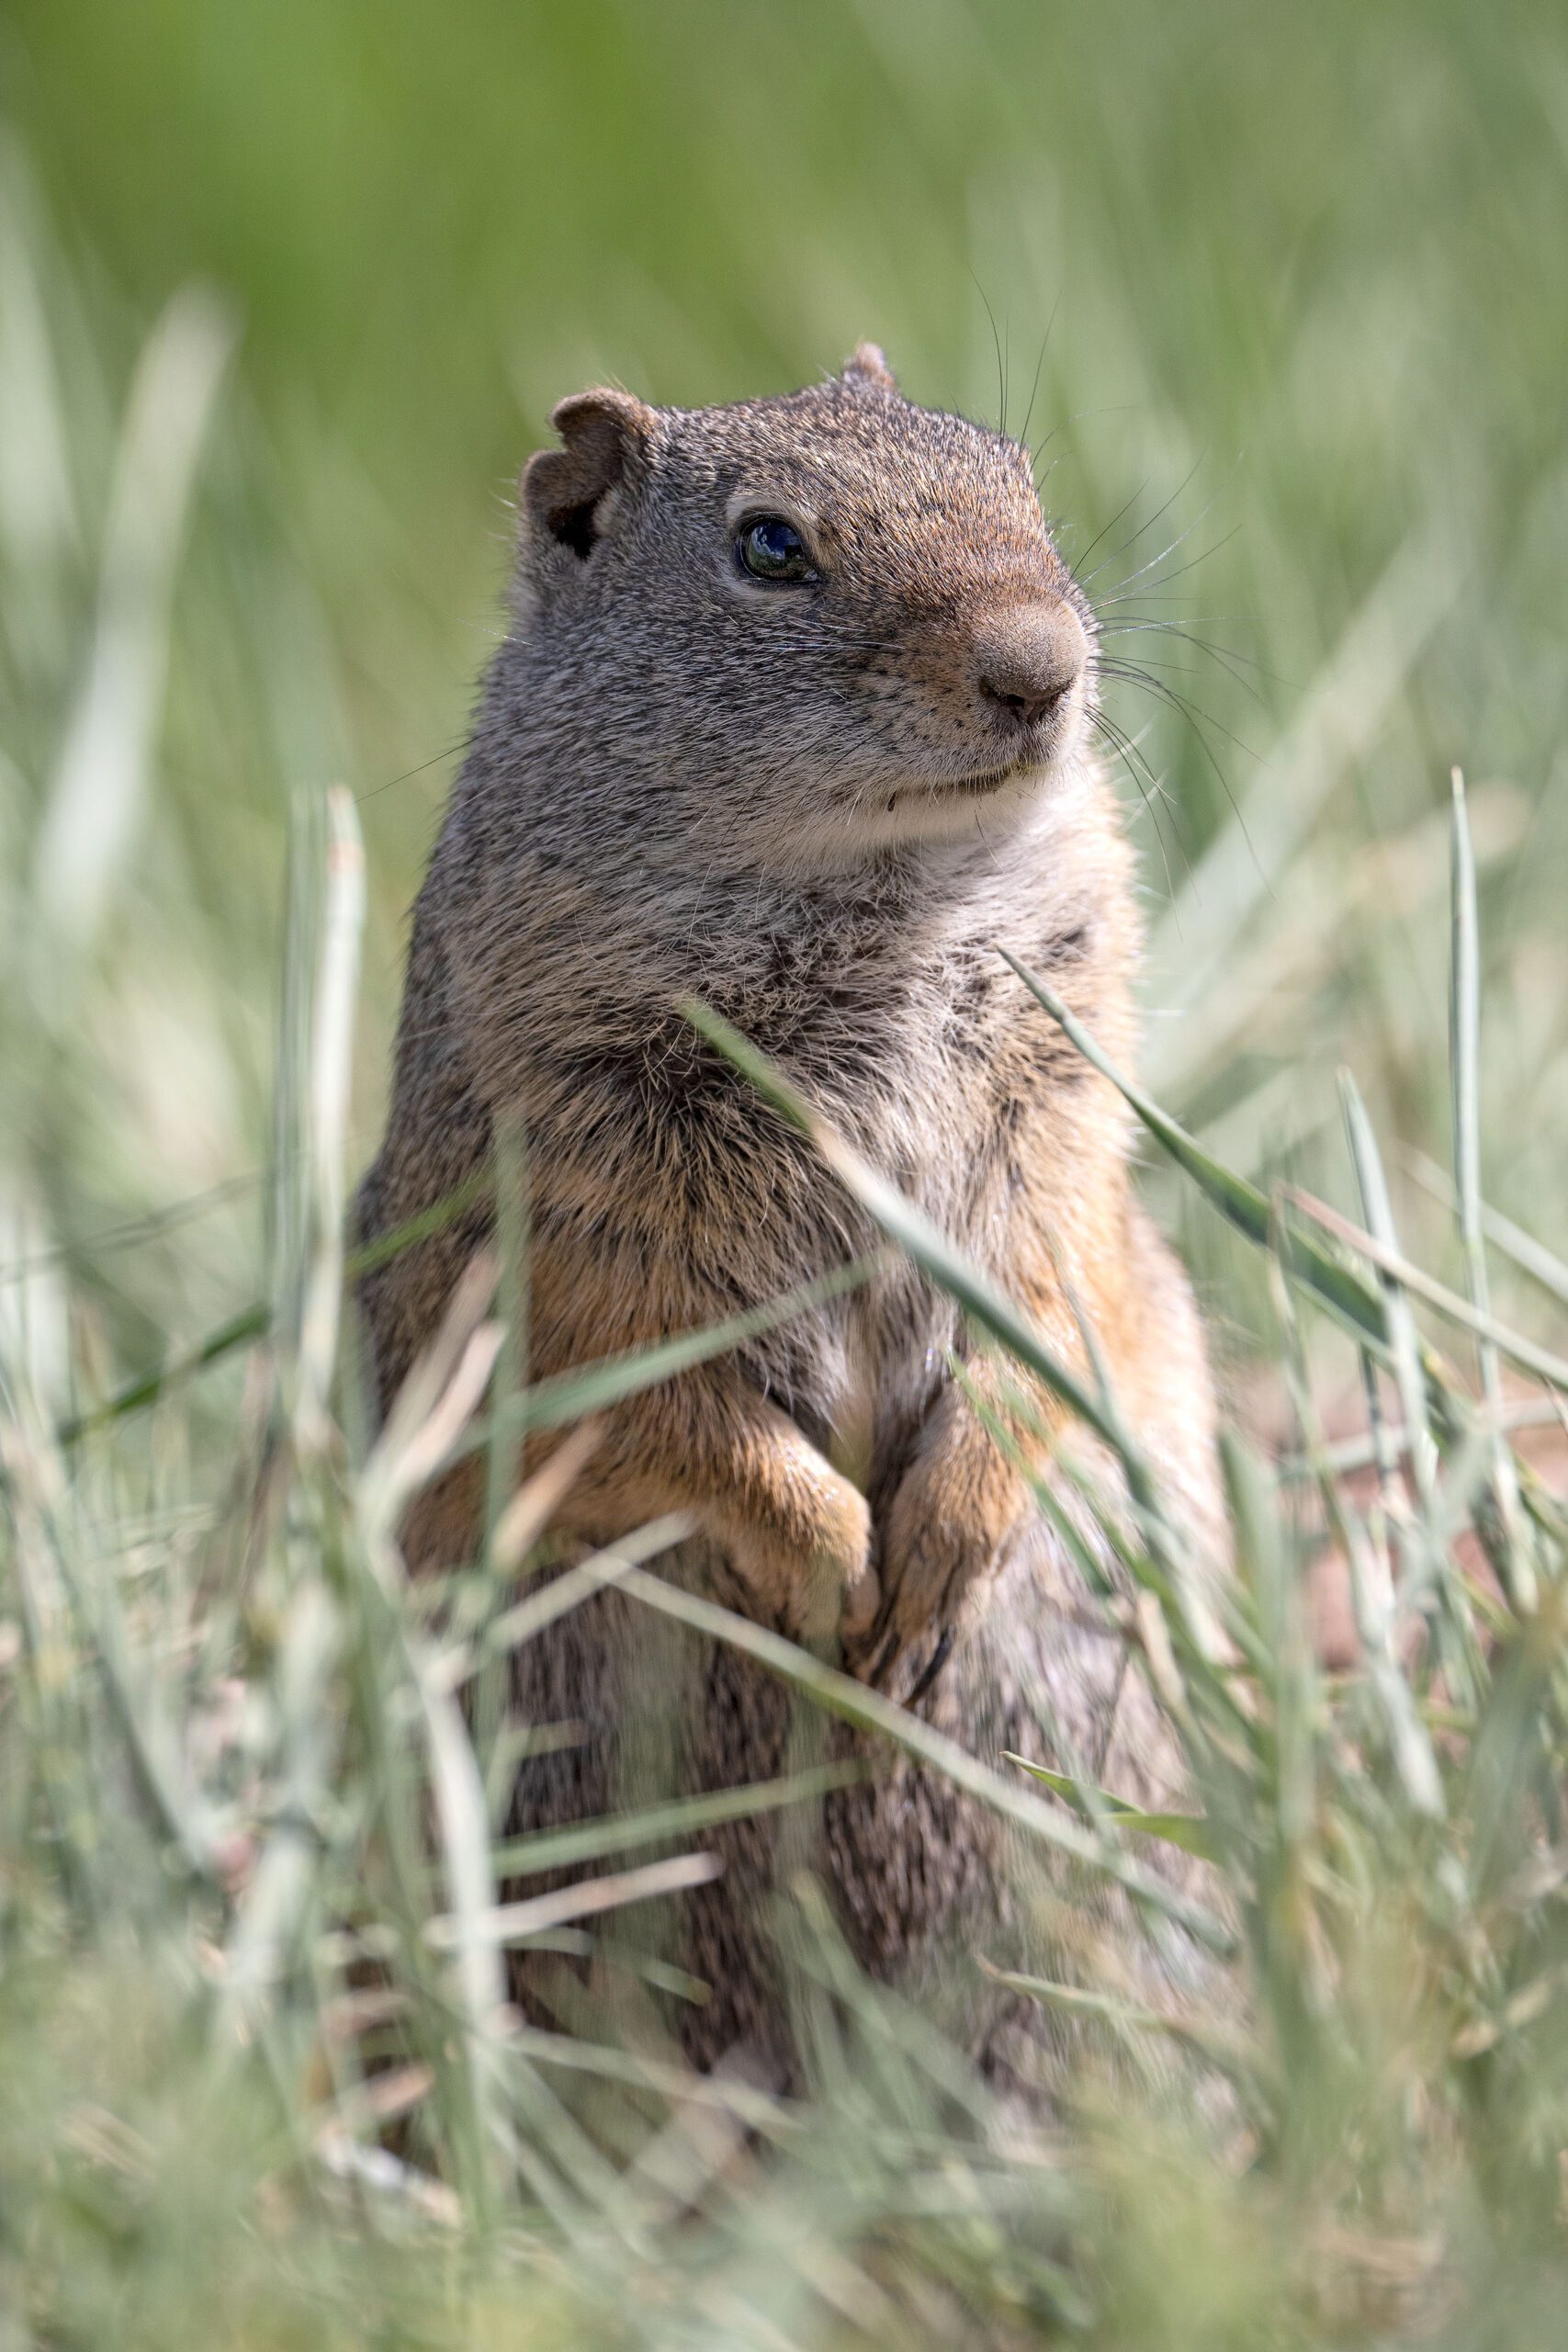 A Uinta Ground Squirrel in early Spring.